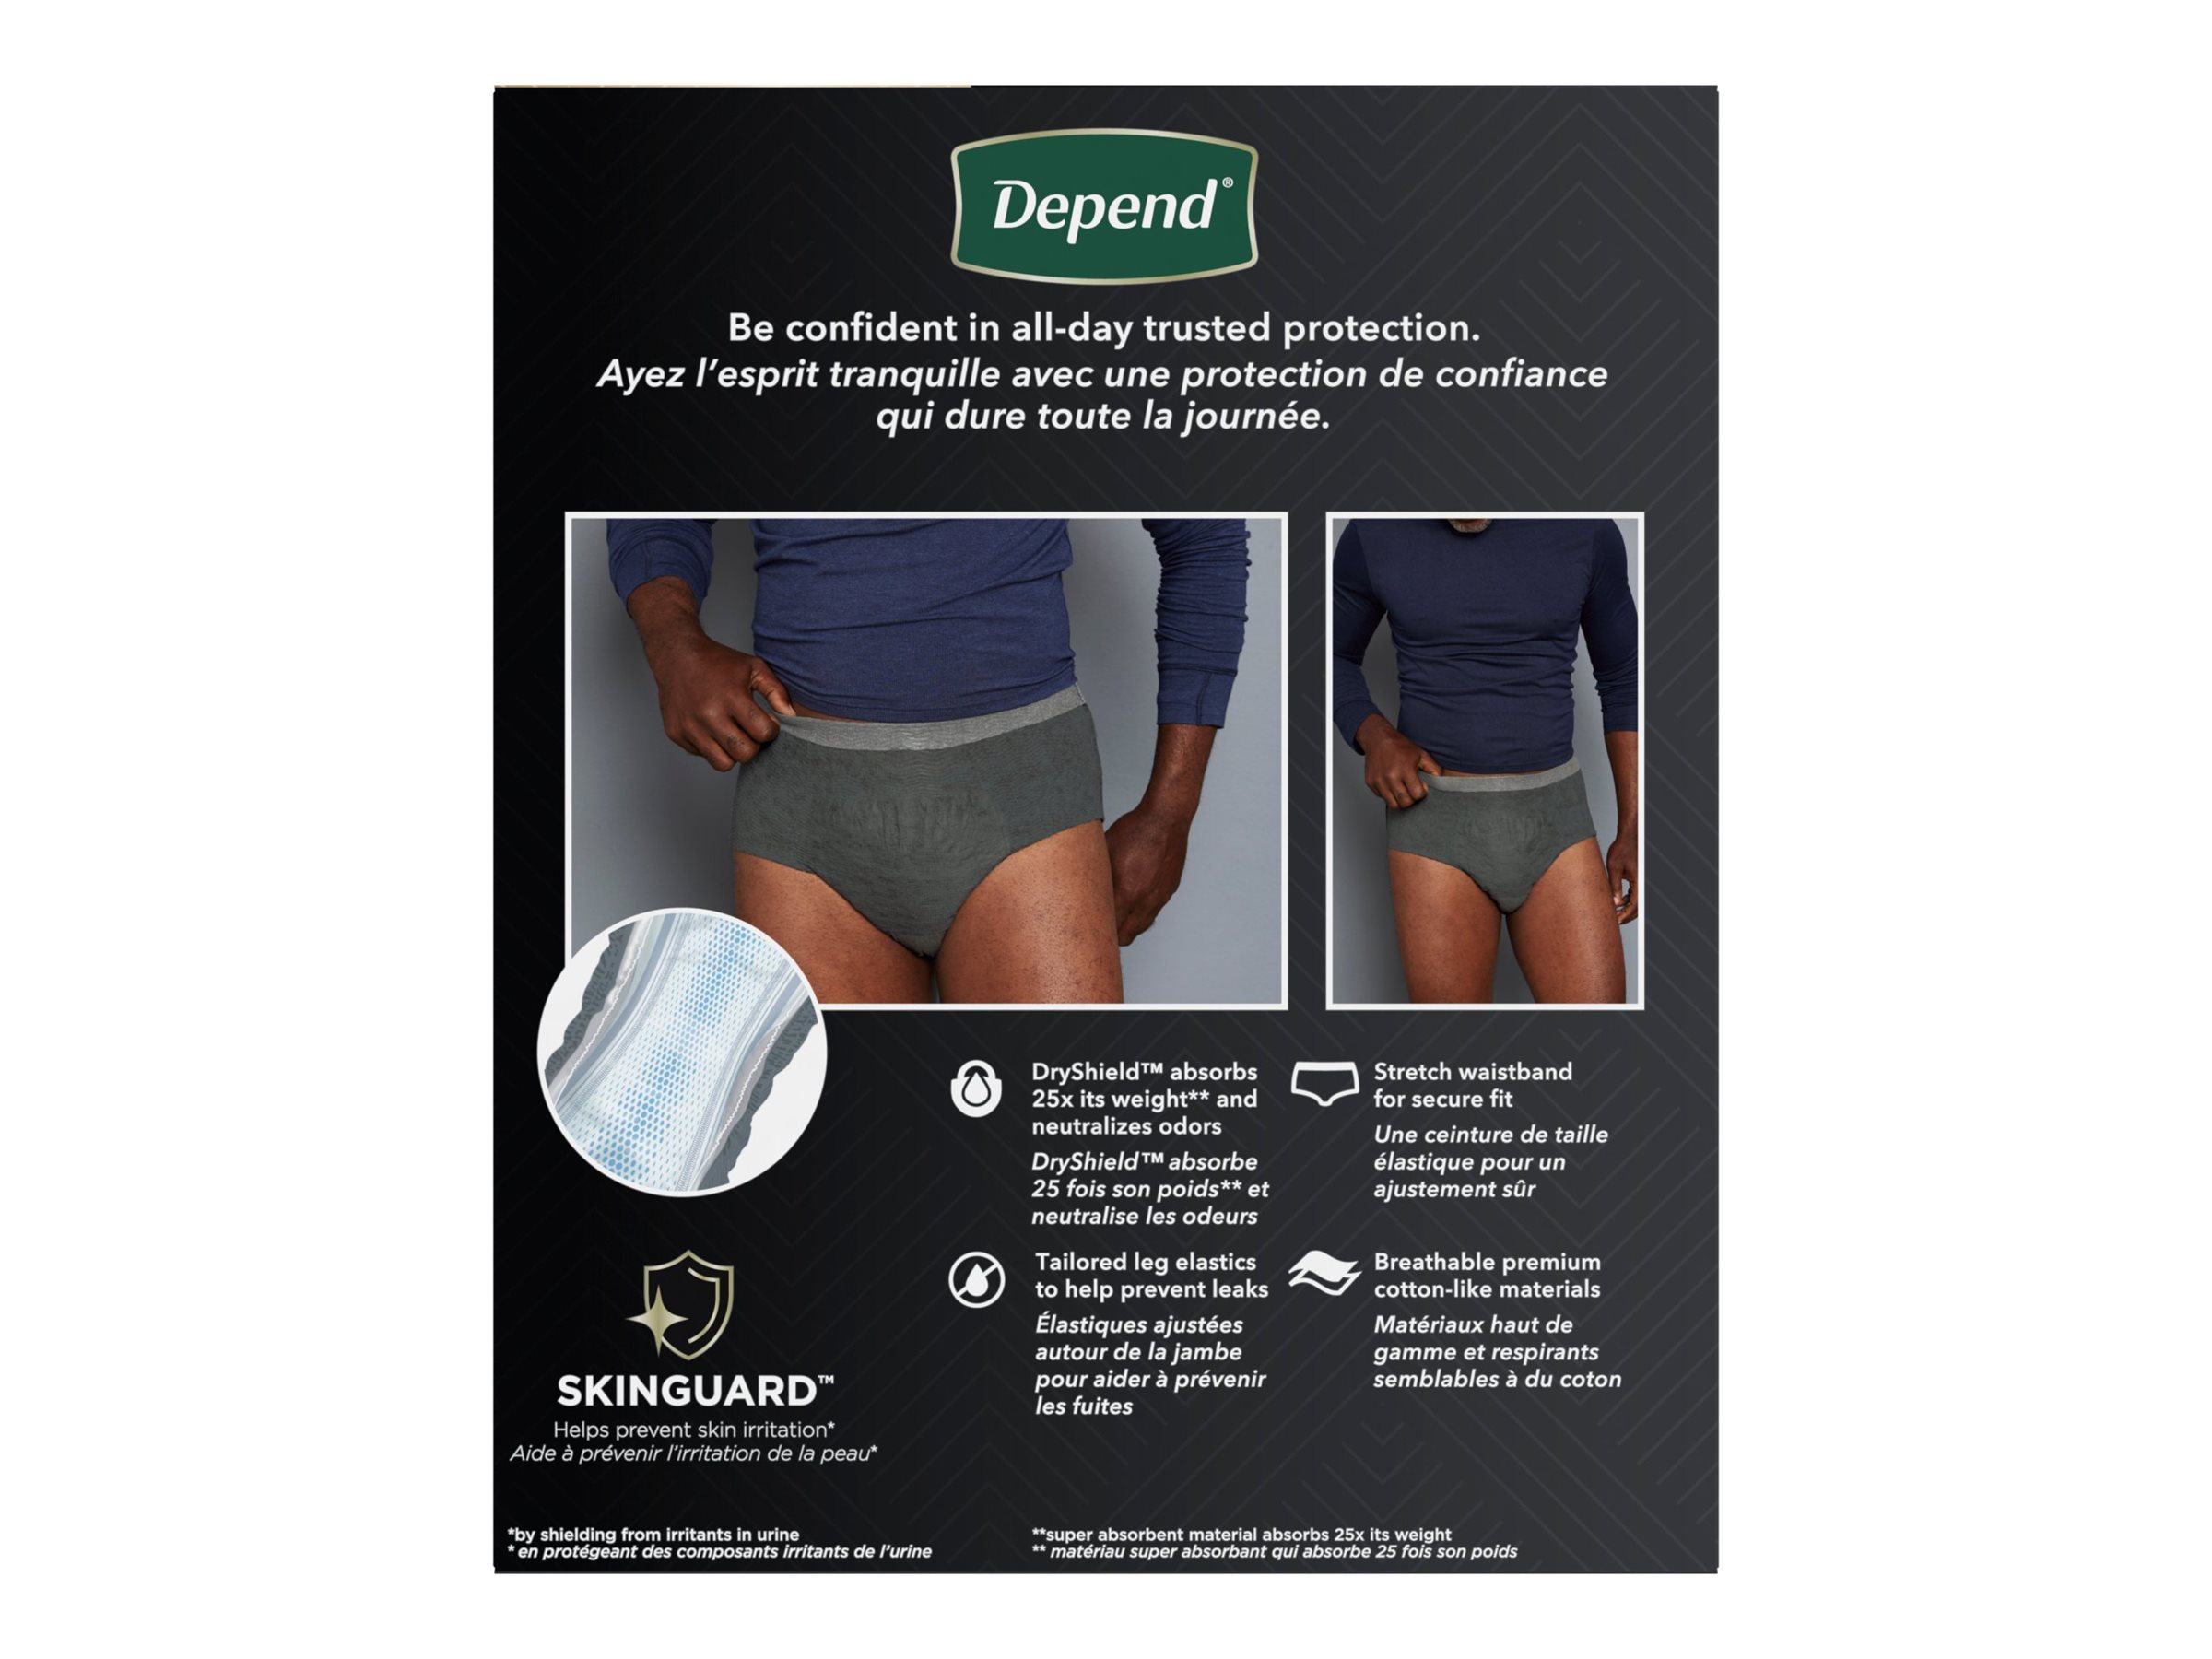 Depend Real Fit Men's Maximum Incontinence Underwear S/M Black Grey 14  Count